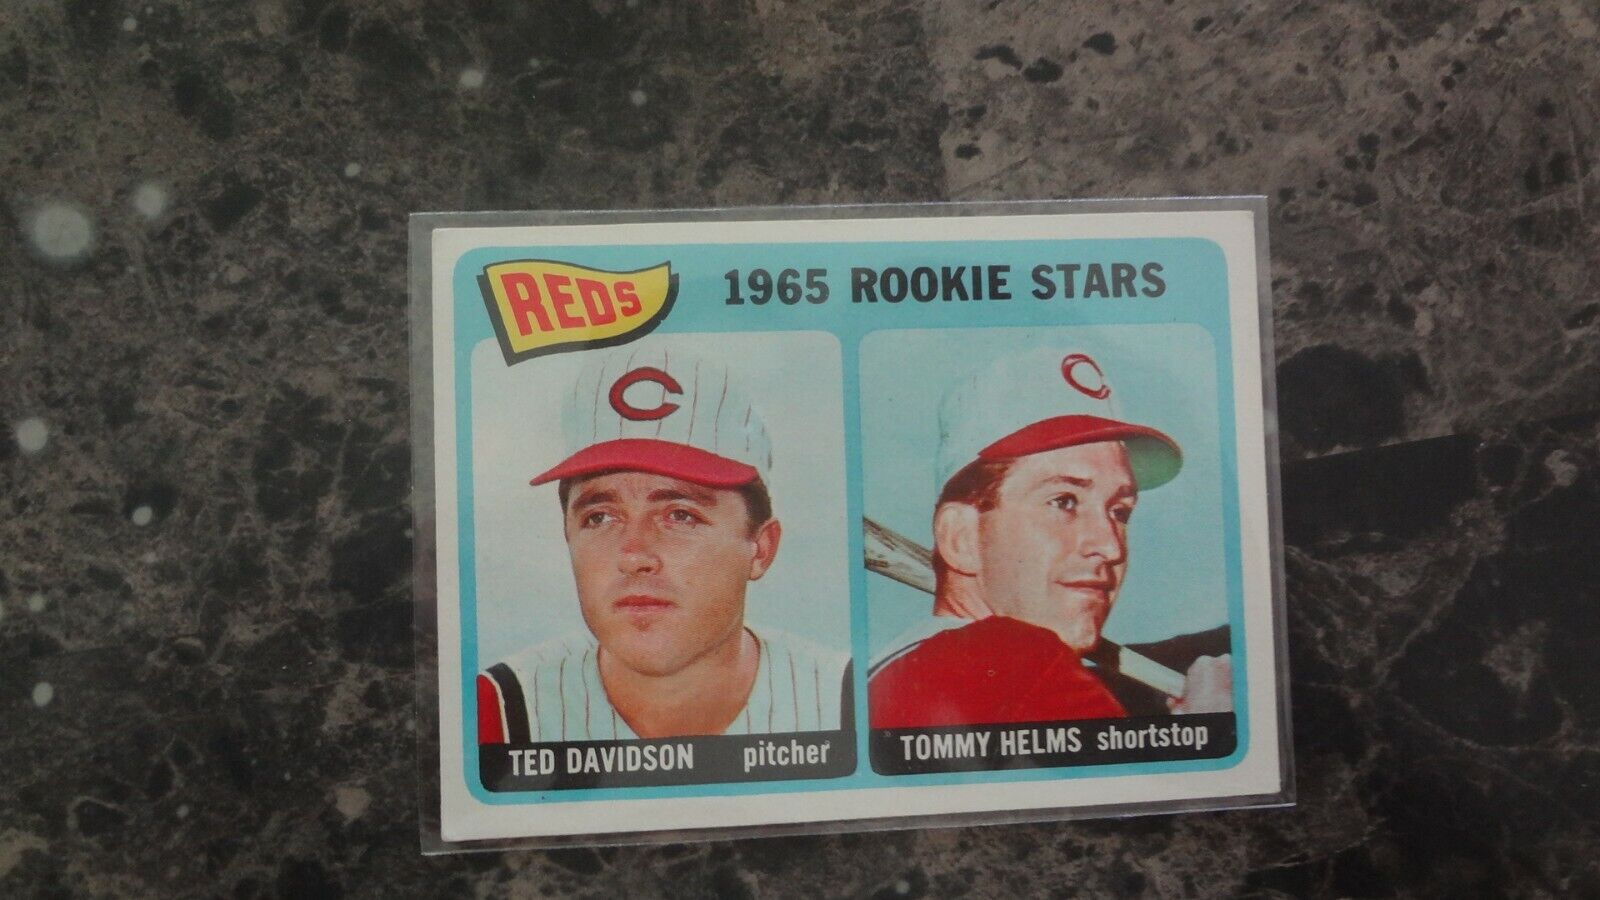 1965 TOPPS #243 REDS ROOKIE STARS TOMMY HELMS TED DAVIDSON BASEBALL CARD. rookie card picture